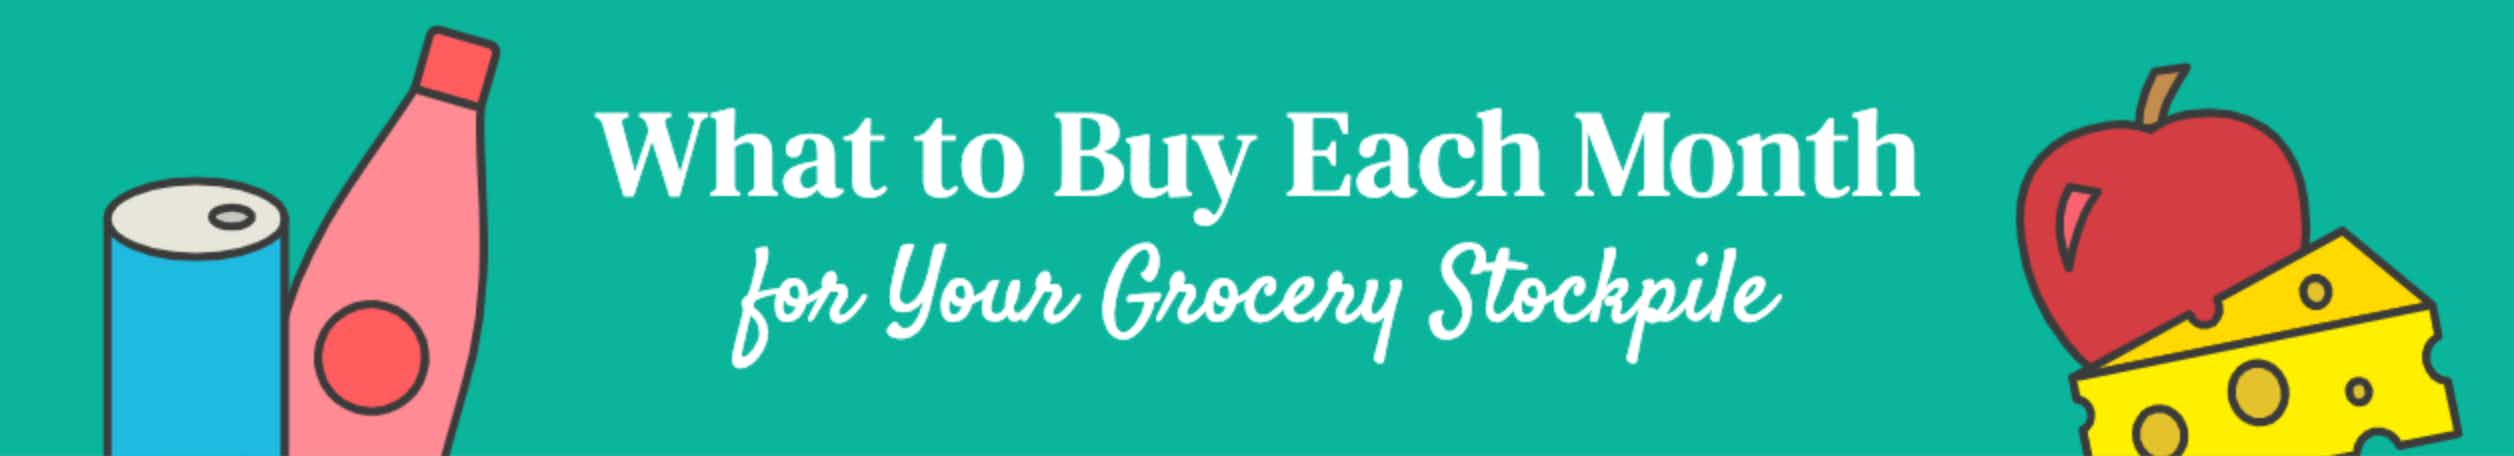 A graphic labeled, "What to Buy Each Month for your grocery stockpile